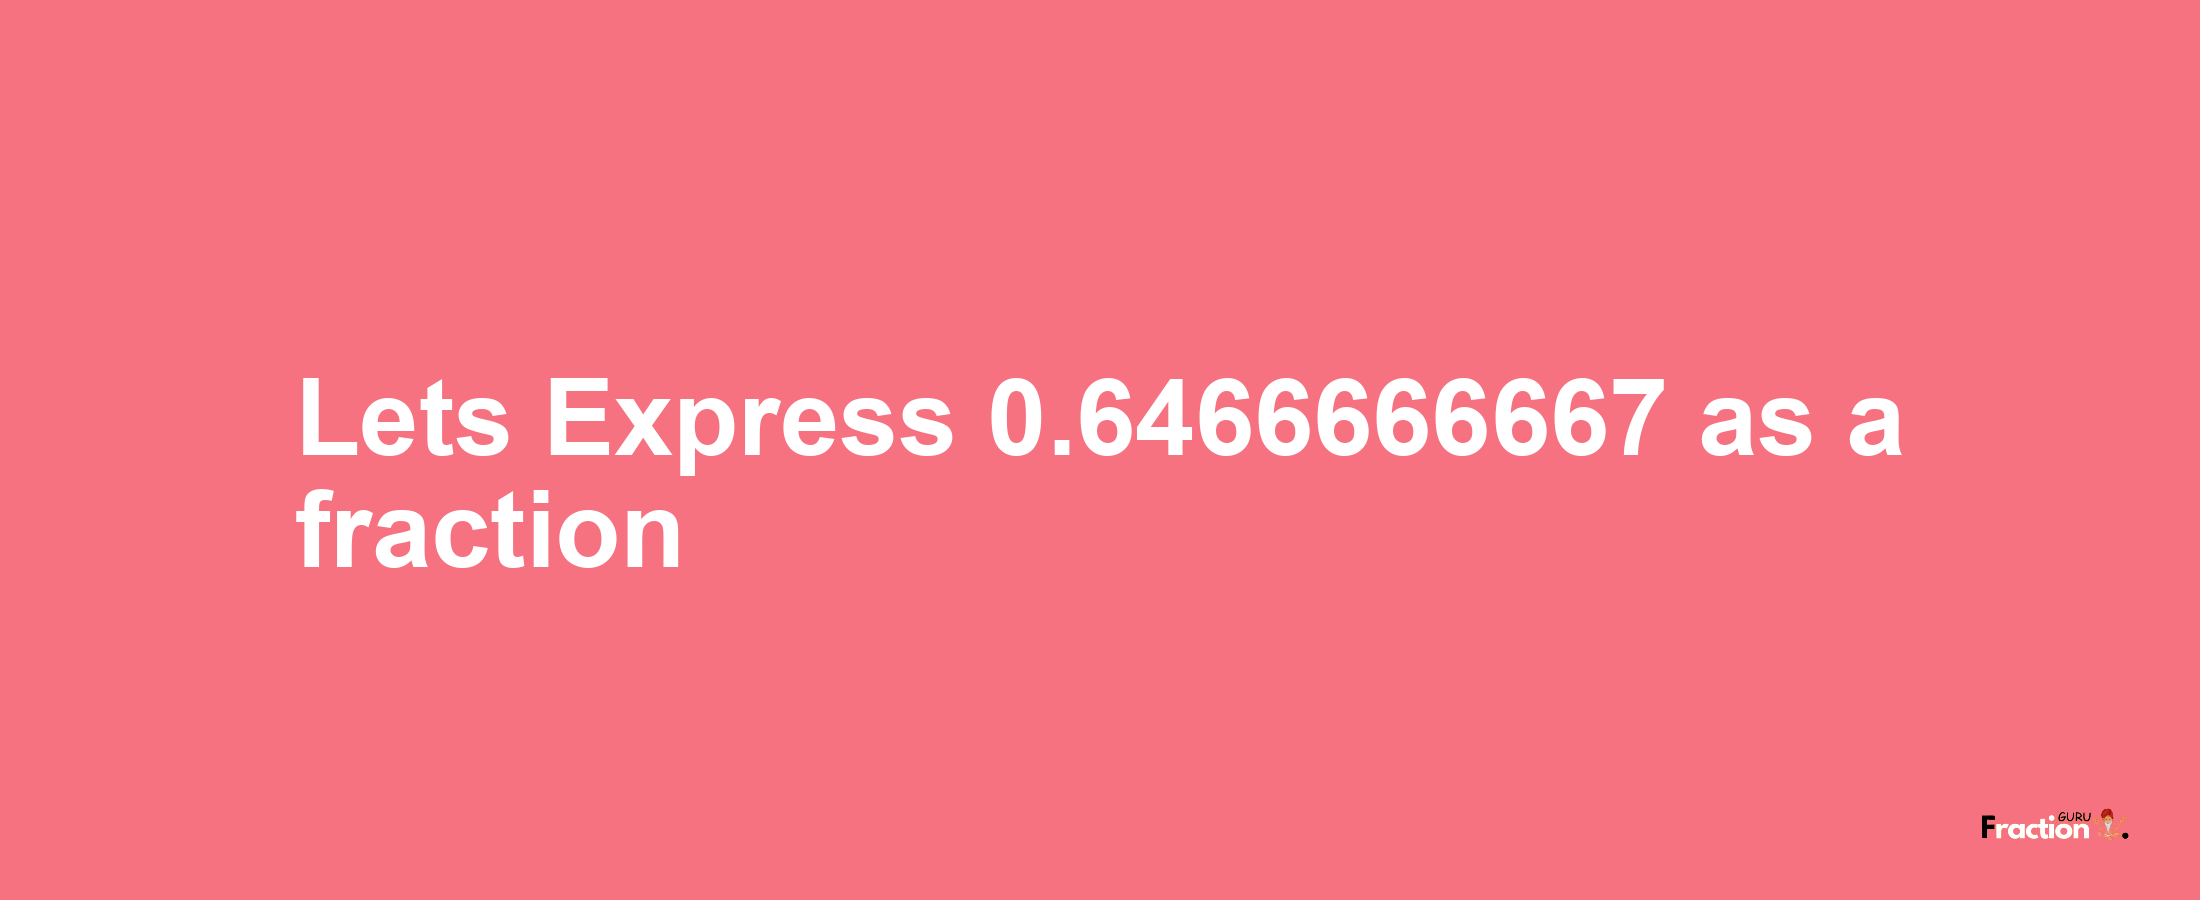 Lets Express 0.6466666667 as afraction